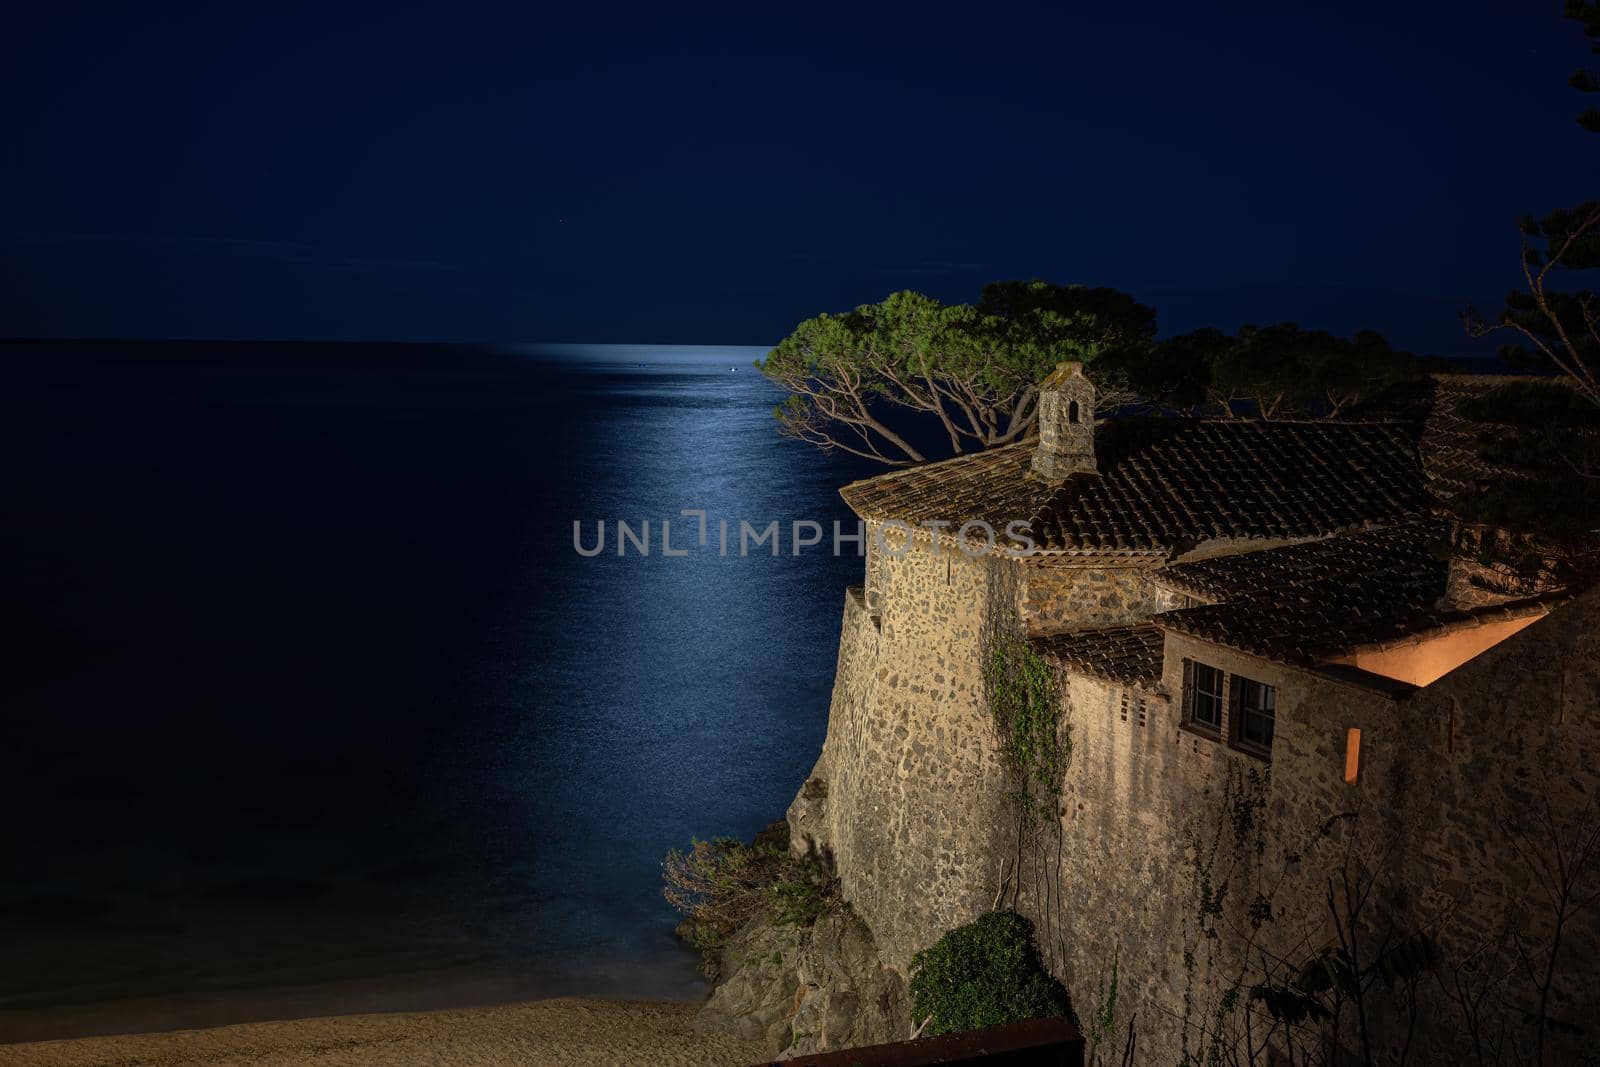 Night scene , long exposure picture from a traditional building in Spanish Costa Brava, village Calella de Palafrugell